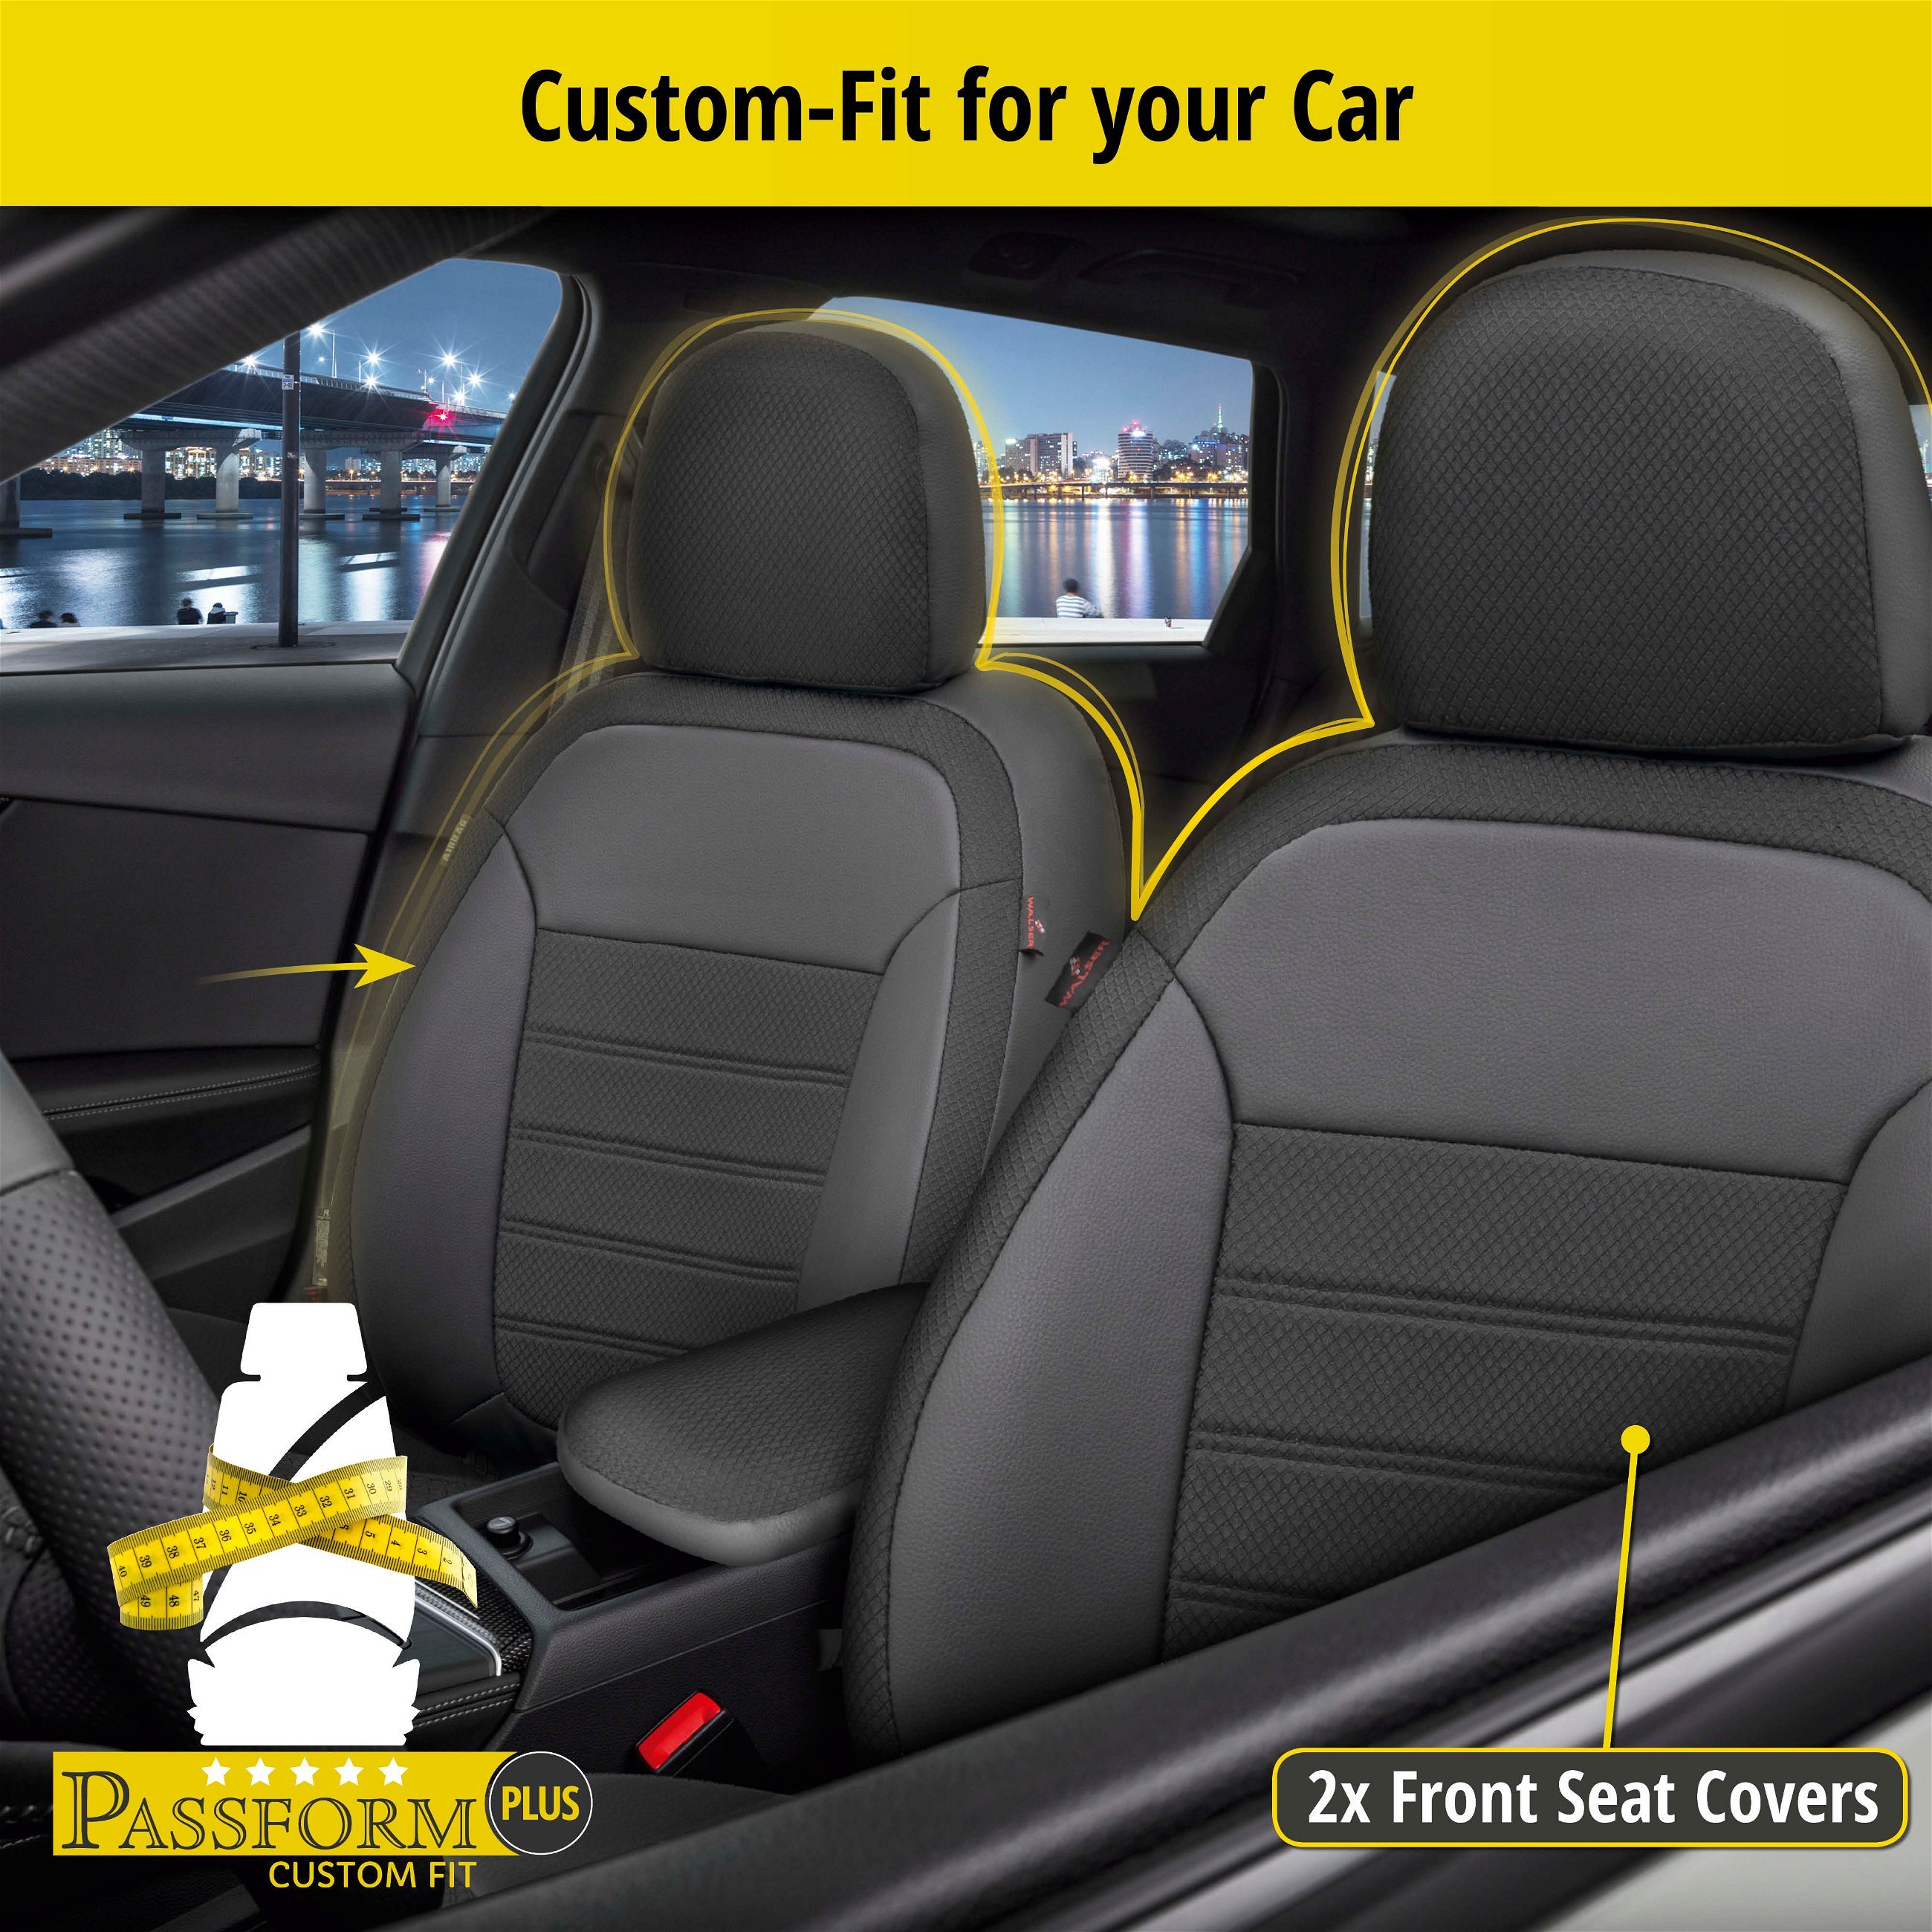 Seat Cover Aversa for Opel Corsa D (S07) 07/2006-08/2014, 2 seat covers for normal seats